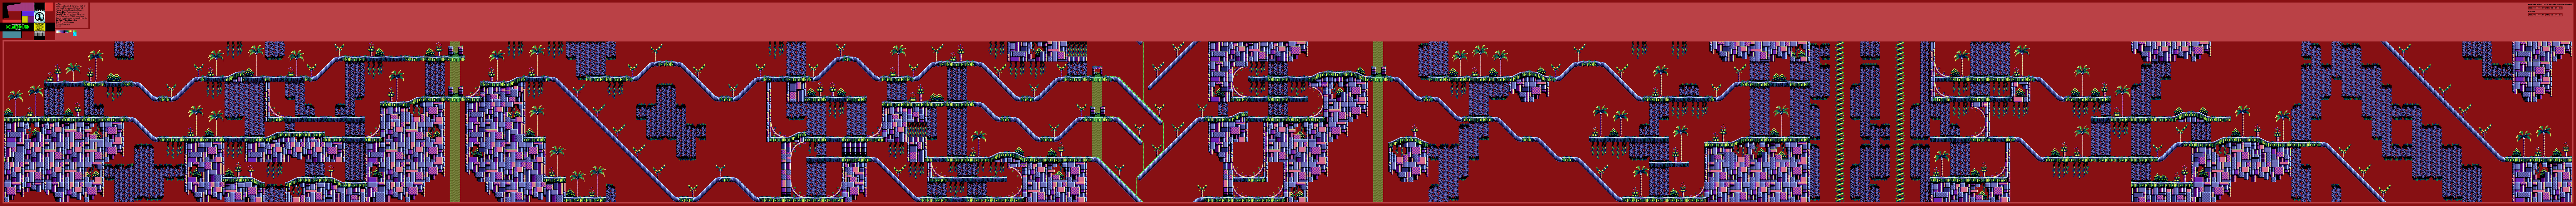 Knuckles' Chaotix (32X) - Isolated Island (Training) Levels 0 & 1 (Morning)